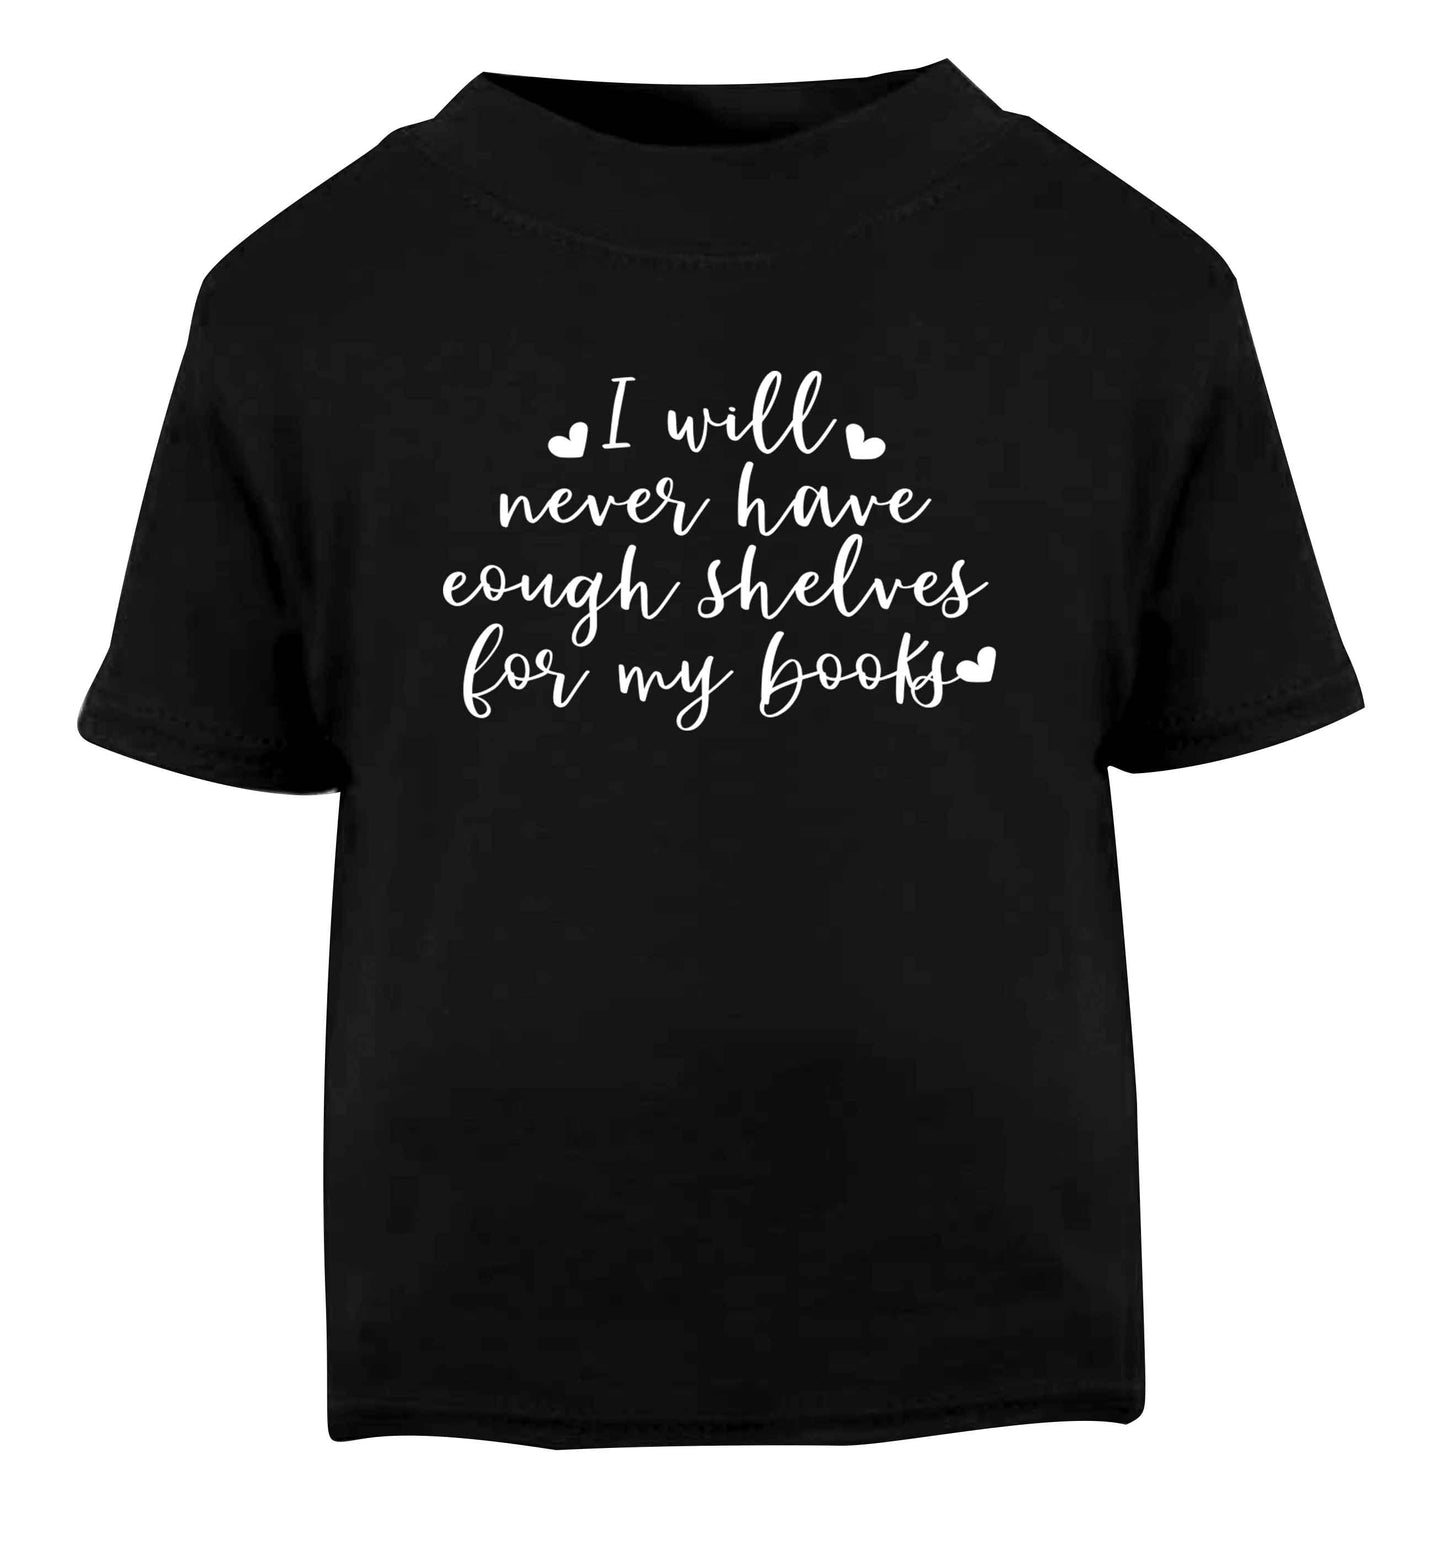 I will never have enough shelves for my books Black Baby Toddler Tshirt 2 years